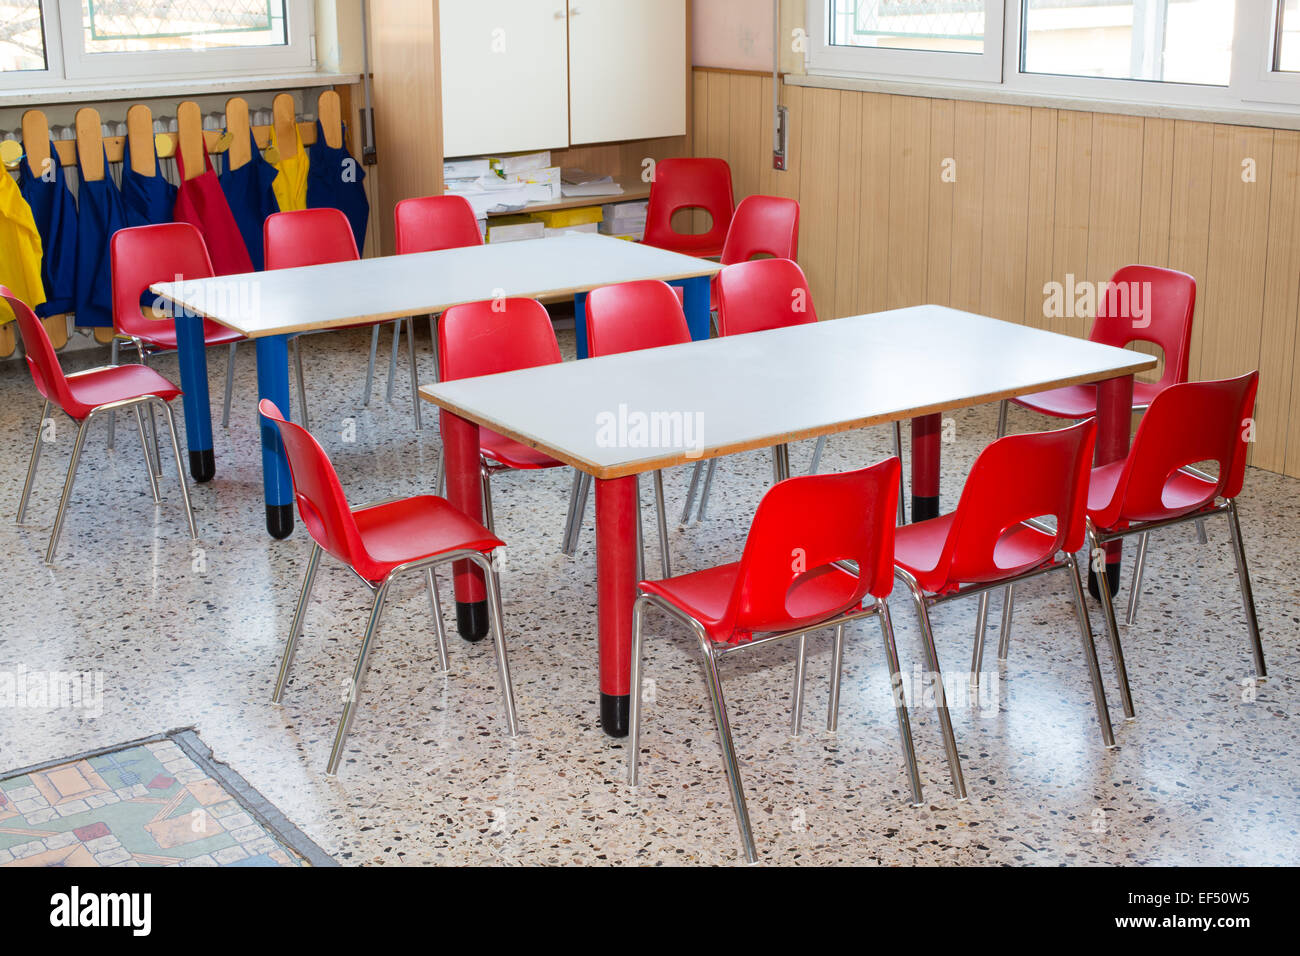 classroom nursery with small chairs and small desks for children Stock Photo